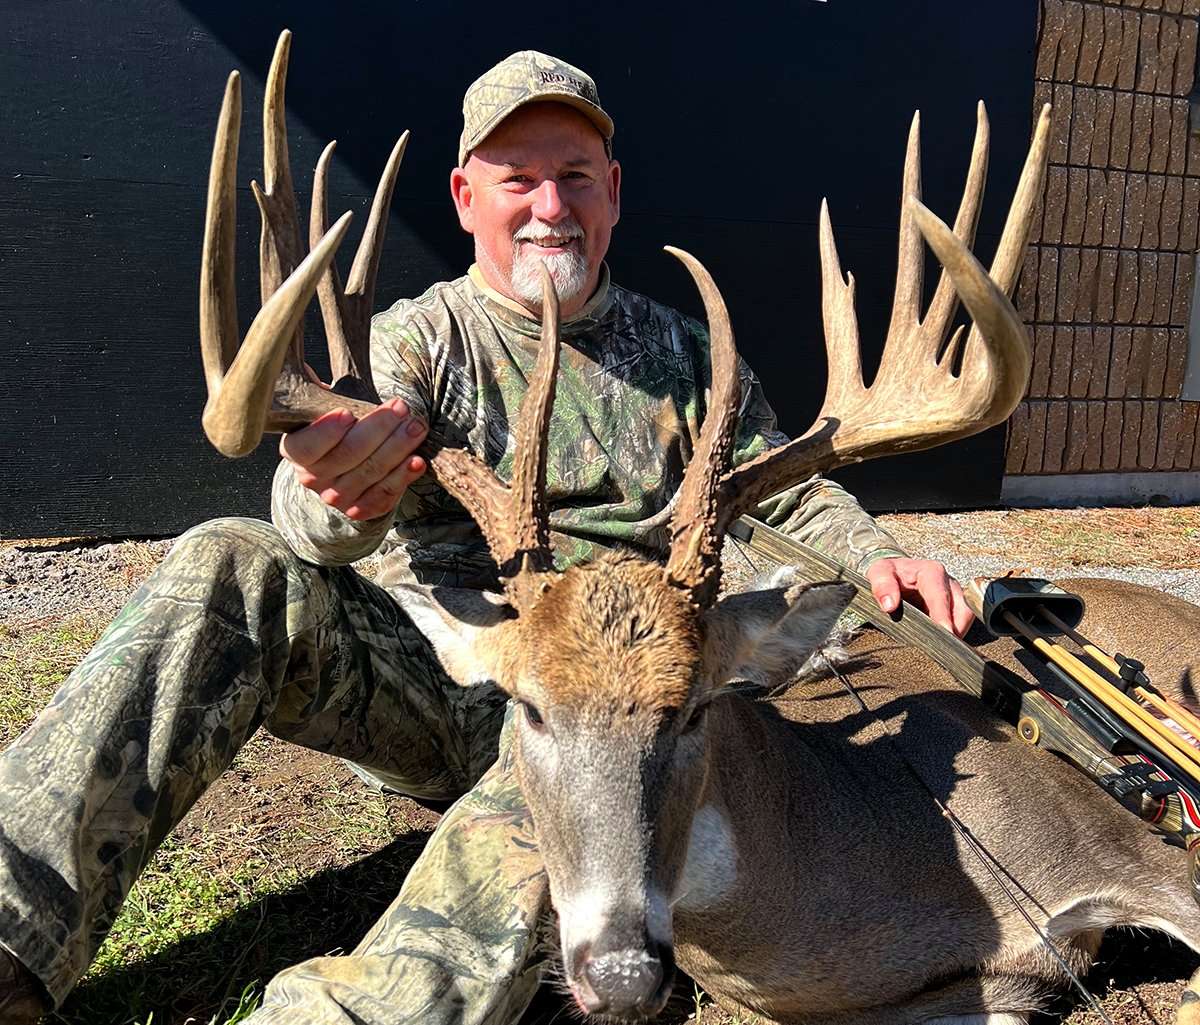 Jerry Bowers shot this 200-class (gross) whitetail on November 12 with his Black Widow recurve while hunting in Oklahoma at the McAlester Army Ammunition Plant. Image courtesy of Jerry Bowers